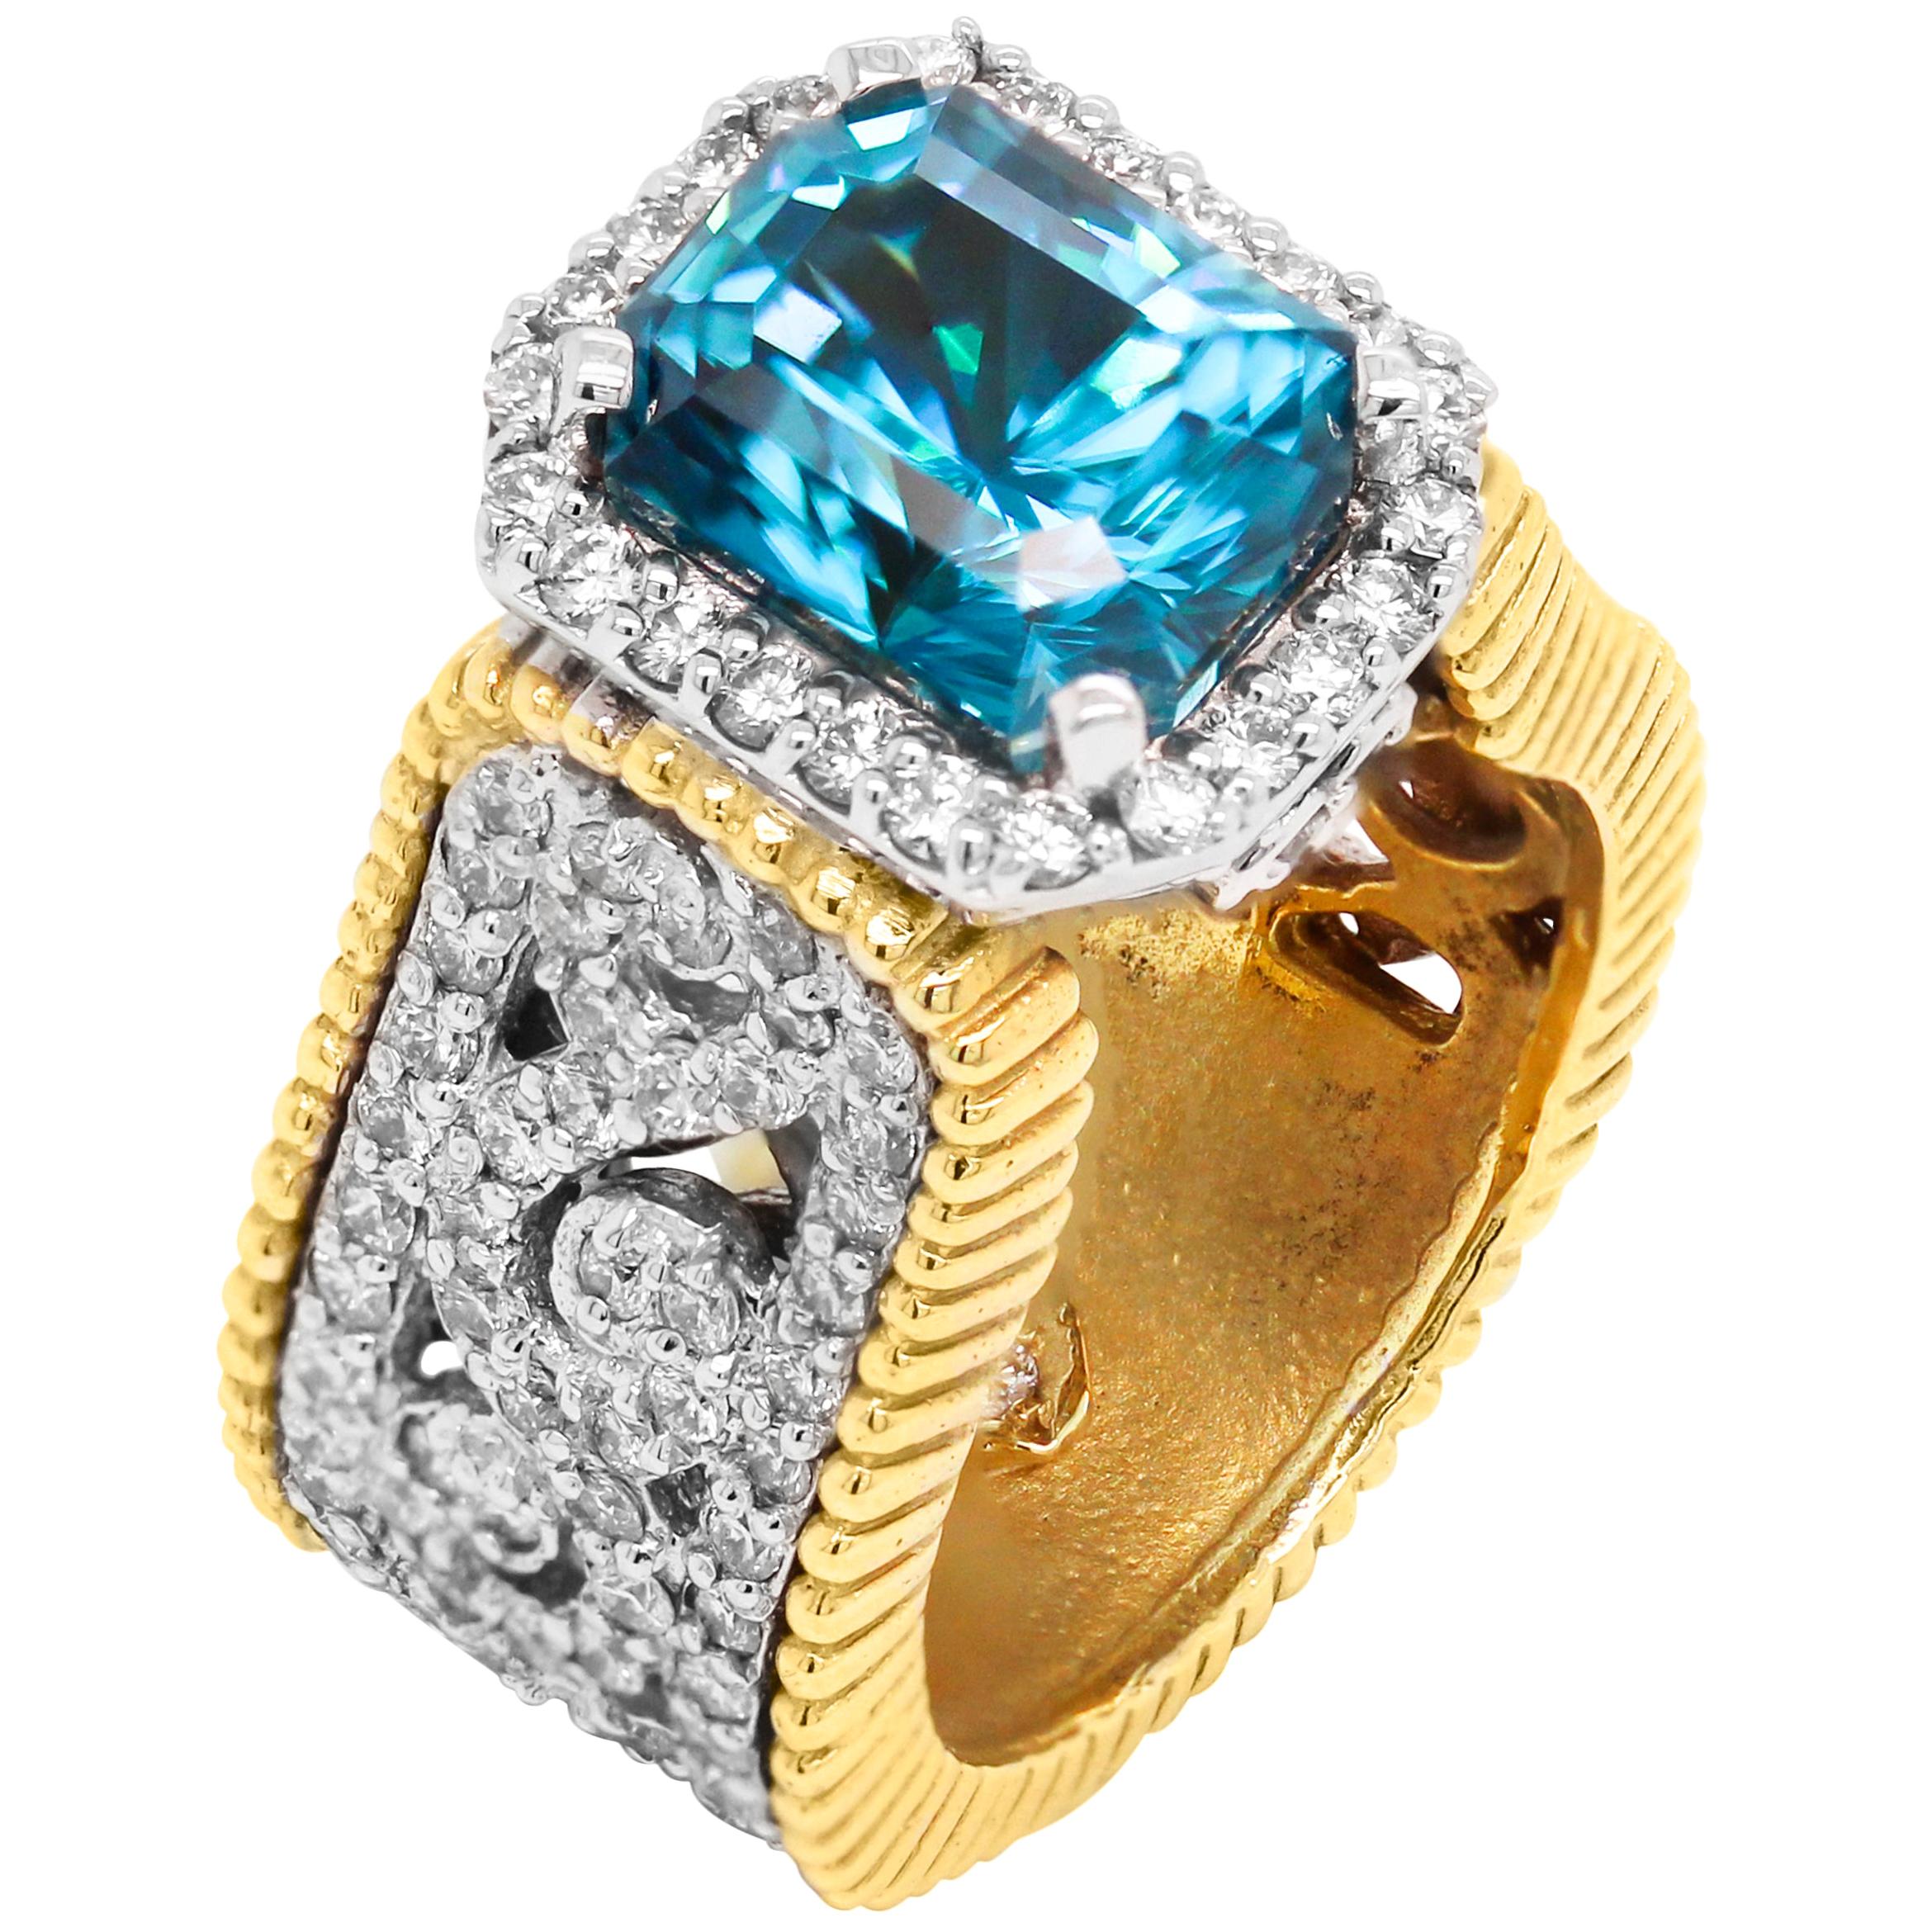 Stambolian 6.67 Carat Blue Zircon 18K Two-Tone Gold and Diamond Cocktail Ring